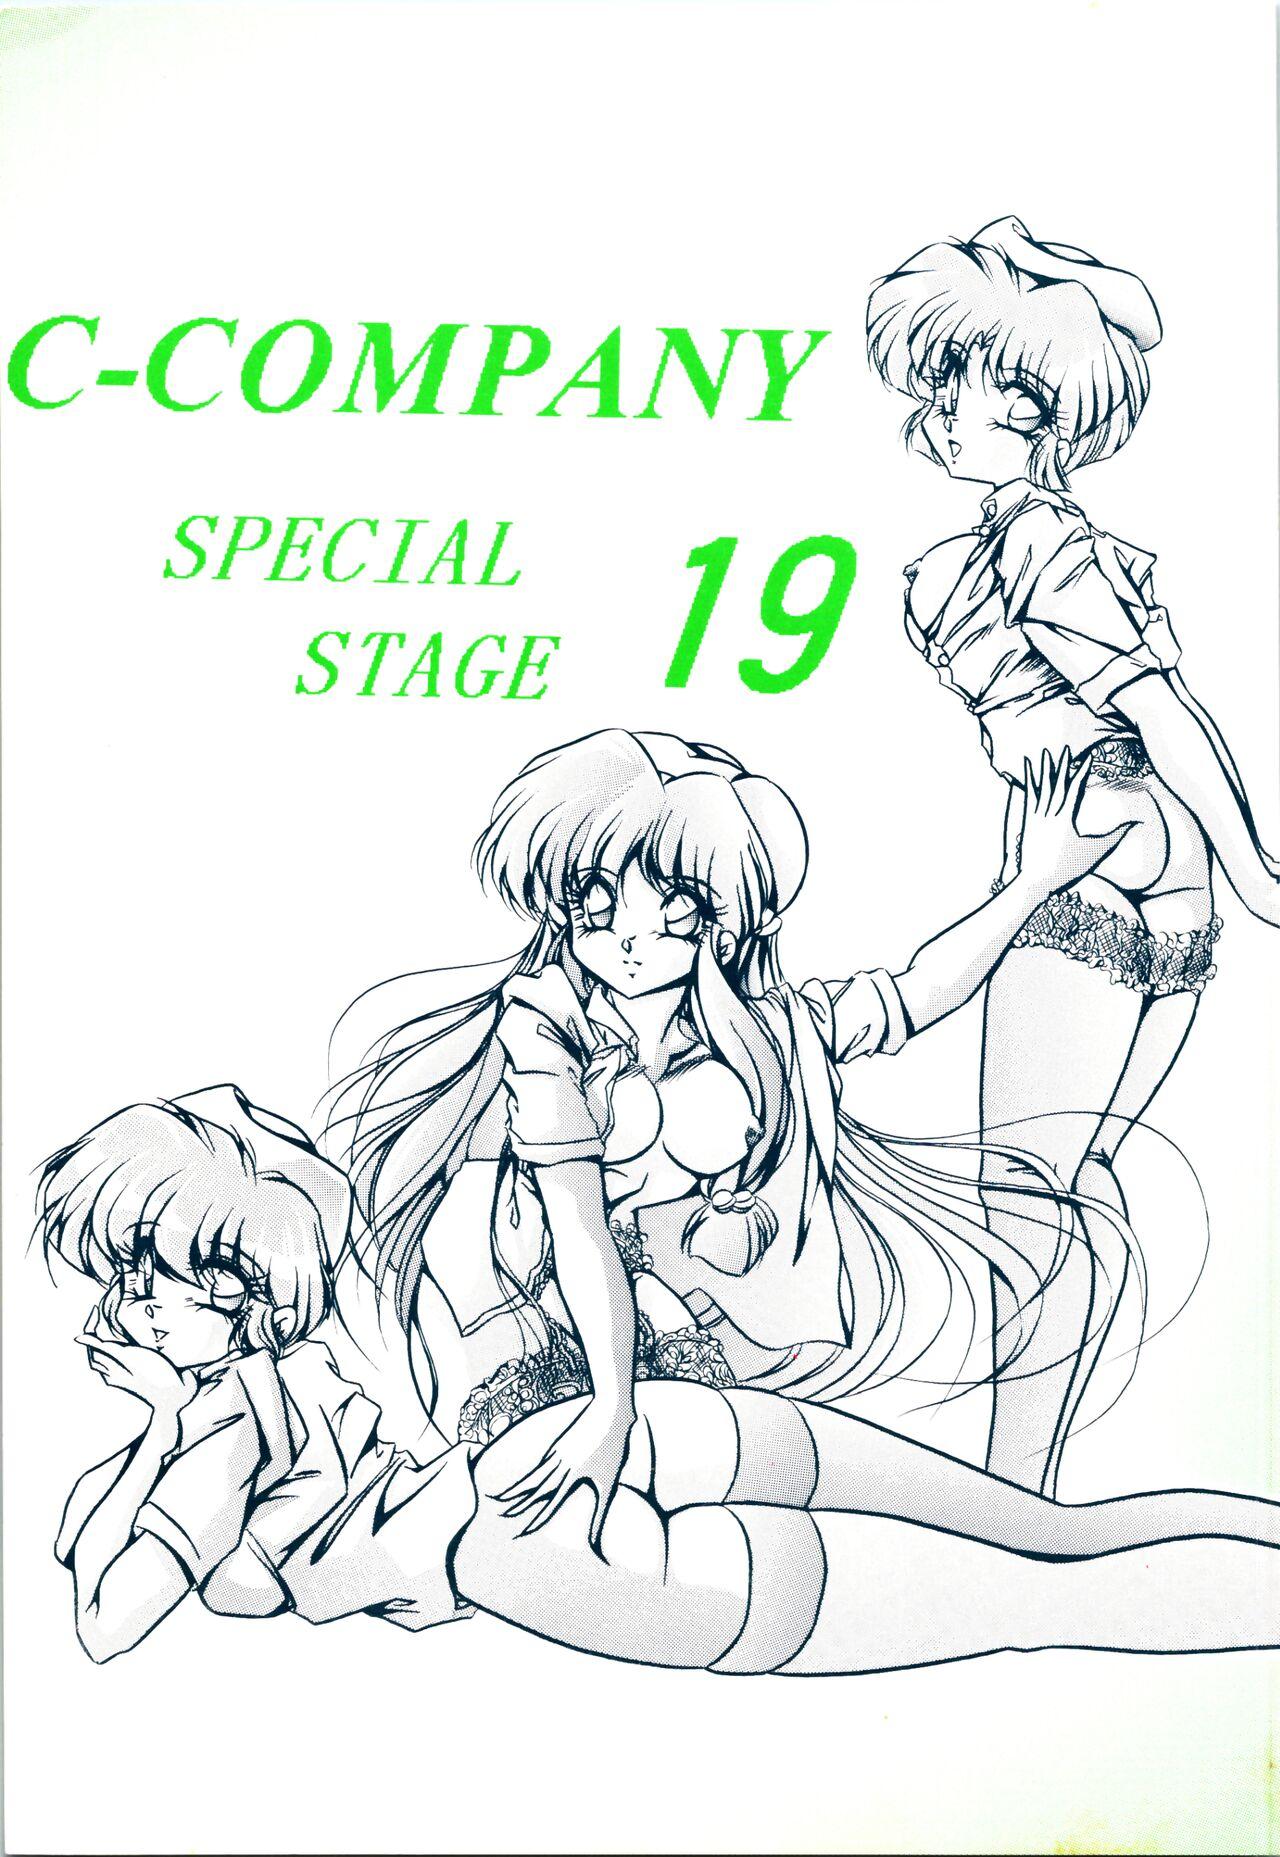 Sapphic C-COMPANY SPECIAL STAGE 19 - Ranma 12 Black - Picture 1